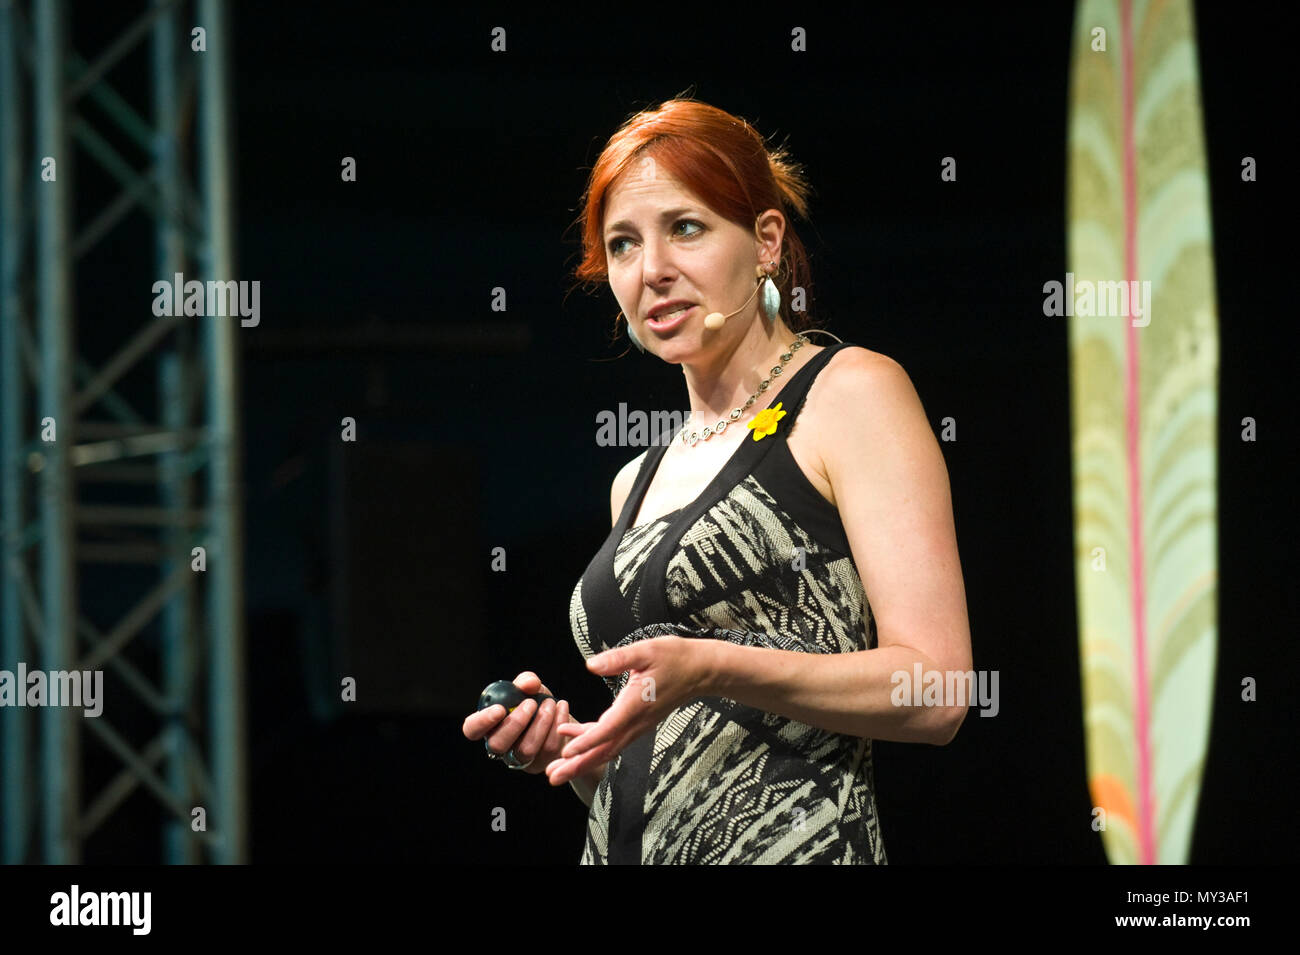 Professor Alice Roberts English anthropologist & television presenter speaking on stage at Hay Festival 2018 Hay-on-Wye Powys Wales UK Stock Photo